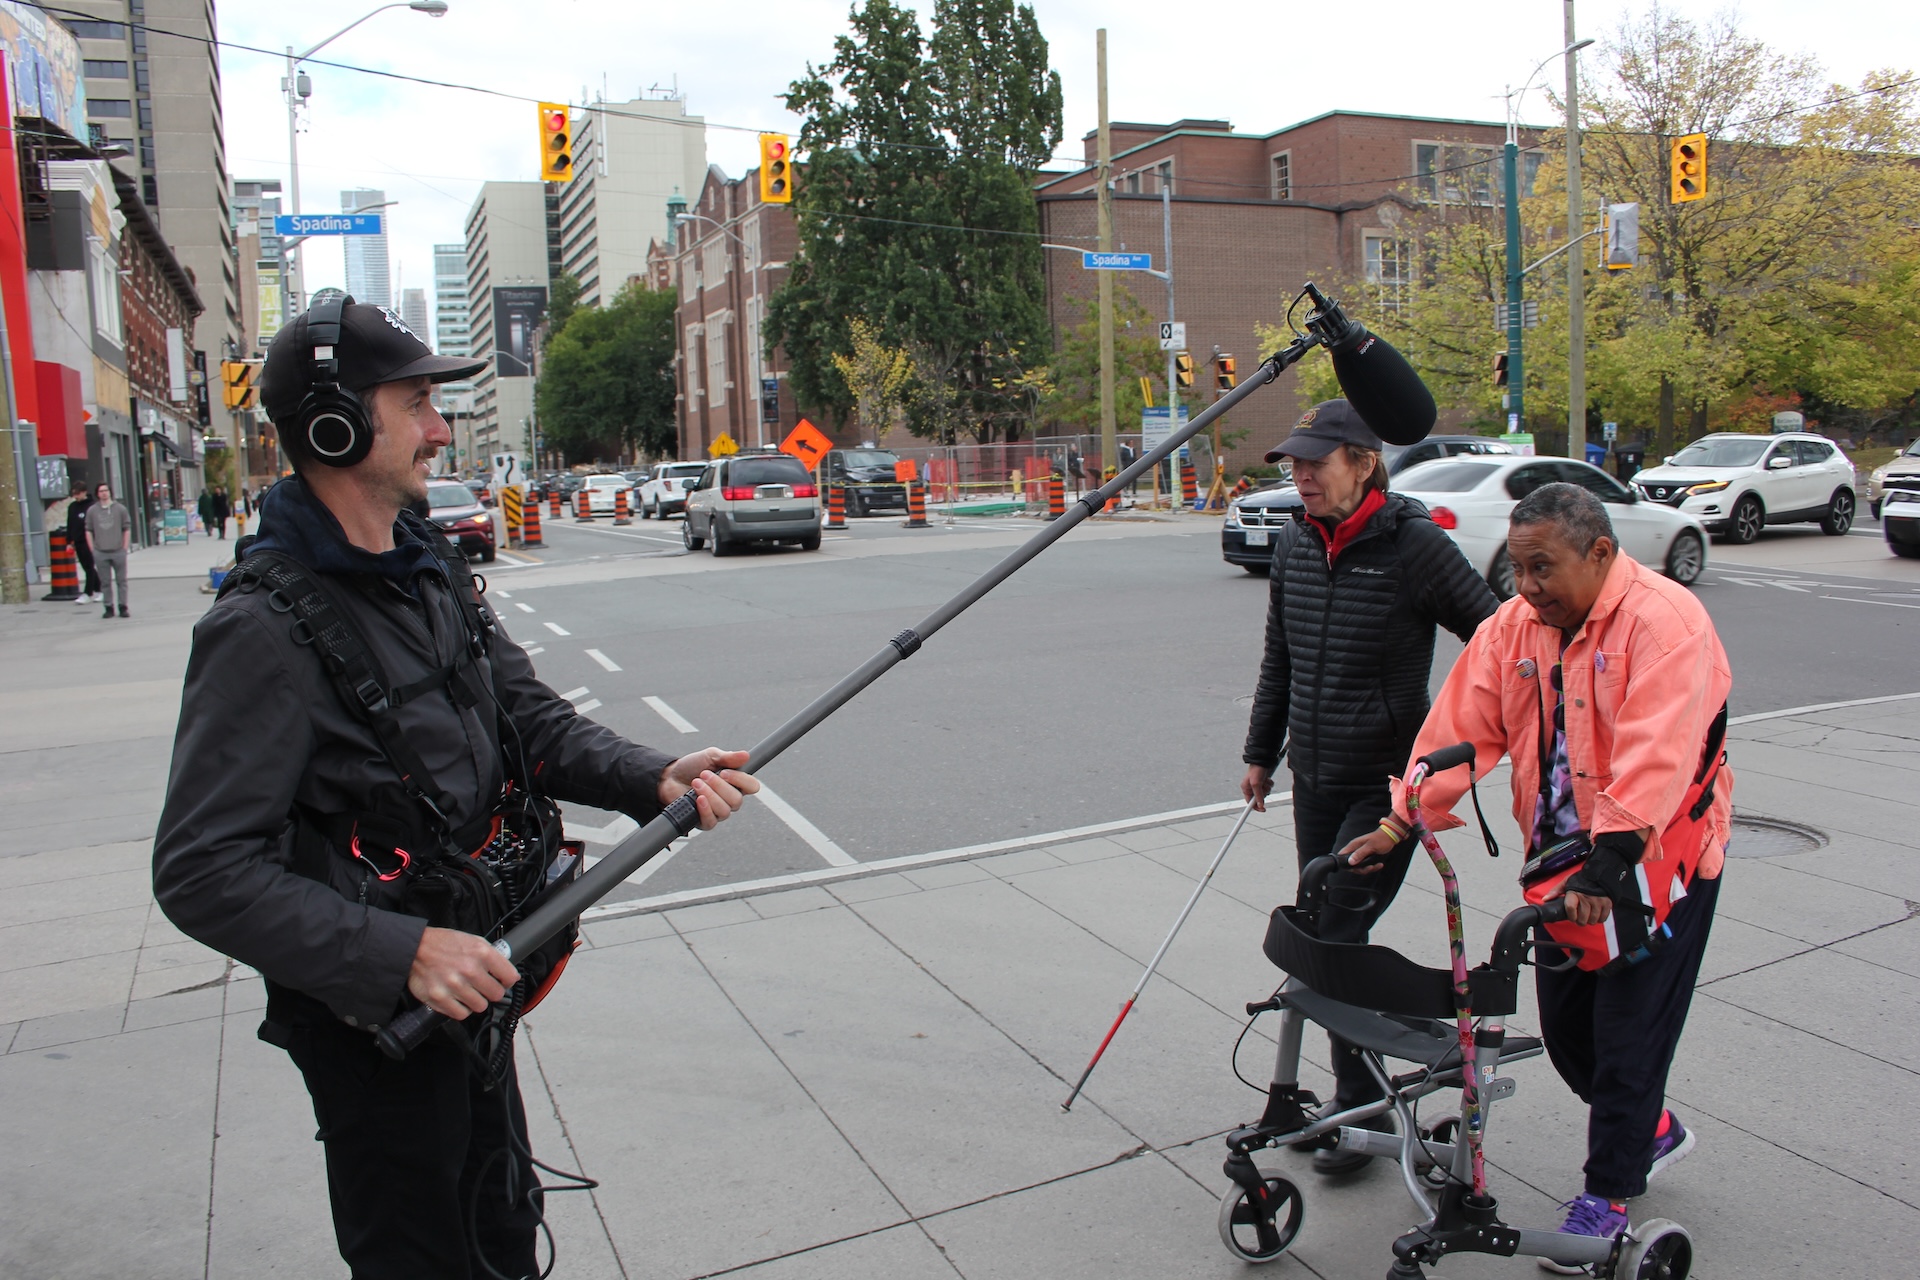 A senior using a walker is crossing the street with Blind artist and playwright Alex Bulmer. A person is recording the interaction with a boom mic. 